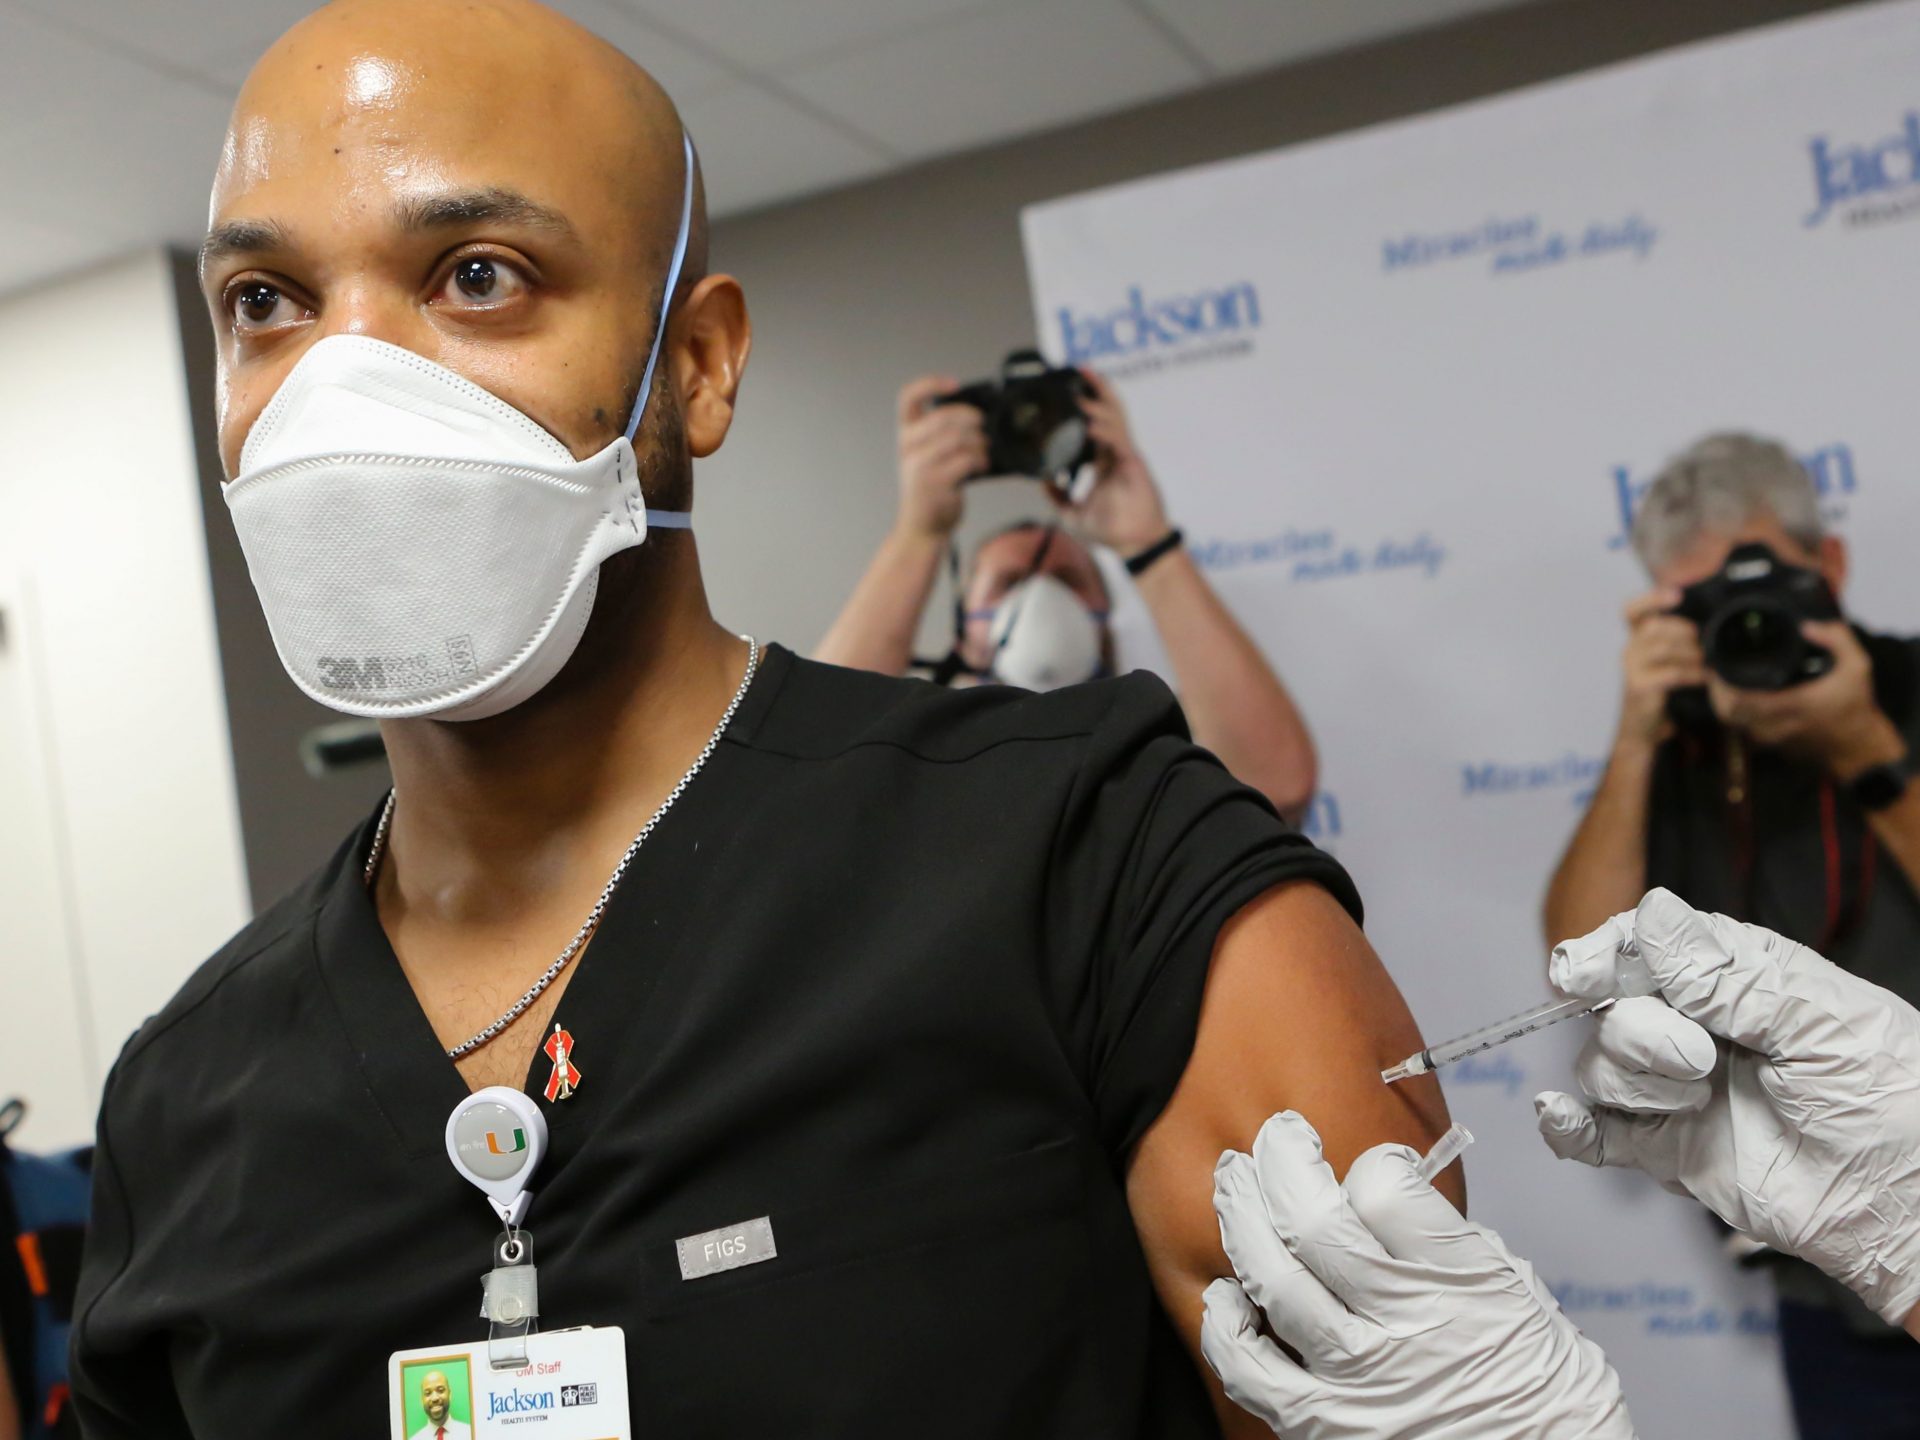 Dr. Hansel Tookes made sure his first dose of Pfizer's COVID-19 vaccine at Jackson Memorial Hospital in Miami on Dec. 15. was televised, as a way to combat hesitancy.